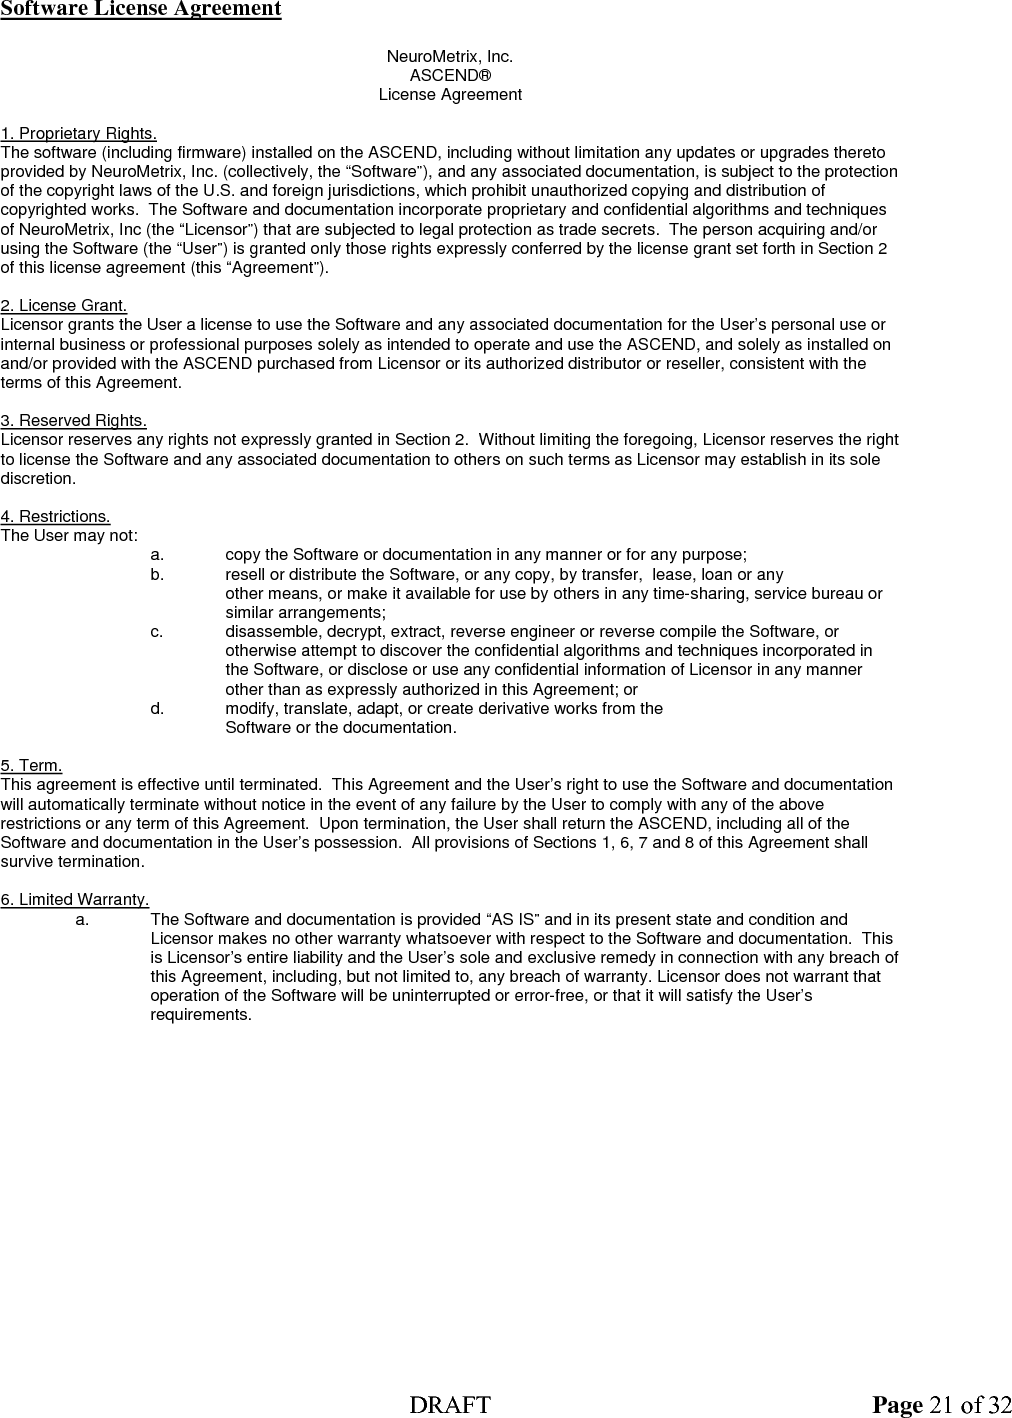  DRAFT Page 21 of 32 Software License Agreement  NeuroMetrix, Inc. ASCEND® License Agreement  1. Proprietary Rights. The software (including firmware) installed on the ASCEND, including without limitation any updates or upgrades thereto provided by NeuroMetrix, Inc. (collectively, the “Software”), and any associated documentation, is subject to the protection of the copyright laws of the U.S. and foreign jurisdictions, which prohibit unauthorized copying and distribution of copyrighted works.  The Software and documentation incorporate proprietary and confidential algorithms and techniques of NeuroMetrix, Inc (the “Licensor”) that are subjected to legal protection as trade secrets.  The person acquiring and/or using the Software (the “User”) is granted only those rights expressly conferred by the license grant set forth in Section 2 of this license agreement (this “Agreement”).  2. License Grant. Licensor grants the User a license to use the Software and any associated documentation for the User’s personal use or internal business or professional purposes solely as intended to operate and use the ASCEND, and solely as installed on and/or provided with the ASCEND purchased from Licensor or its authorized distributor or reseller, consistent with the terms of this Agreement.  3. Reserved Rights. Licensor reserves any rights not expressly granted in Section 2.  Without limiting the foregoing, Licensor reserves the right to license the Software and any associated documentation to others on such terms as Licensor may establish in its sole discretion.  4. Restrictions.  The User may not:   a.  copy the Software or documentation in any manner or for any purpose;   b.  resell or distribute the Software, or any copy, by transfer,  lease, loan or any    other means, or make it available for use by others in any time-sharing, service bureau or similar arrangements;     c.  disassemble, decrypt, extract, reverse engineer or reverse compile the Software, or  otherwise attempt to discover the confidential algorithms and techniques incorporated in the Software, or disclose or use any confidential information of Licensor in any manner other than as expressly authorized in this Agreement; or     d.  modify, translate, adapt, or create derivative works from the     Software or the documentation.  5. Term.  This agreement is effective until terminated.  This Agreement and the User’s right to use the Software and documentation will automatically terminate without notice in the event of any failure by the User to comply with any of the above restrictions or any term of this Agreement.  Upon termination, the User shall return the ASCEND, including all of the Software and documentation in the User’s possession.  All provisions of Sections 1, 6, 7 and 8 of this Agreement shall survive termination.  6. Limited Warranty.   a.  The Software and documentation is provided “AS IS” and in its present state and condition and  Licensor makes no other warranty whatsoever with respect to the Software and documentation.  This is Licensor’s entire liability and the User’s sole and exclusive remedy in connection with any breach of this Agreement, including, but not limited to, any breach of warranty. Licensor does not warrant that operation of the Software will be uninterrupted or error-free, or that it will satisfy the User’s requirements.  